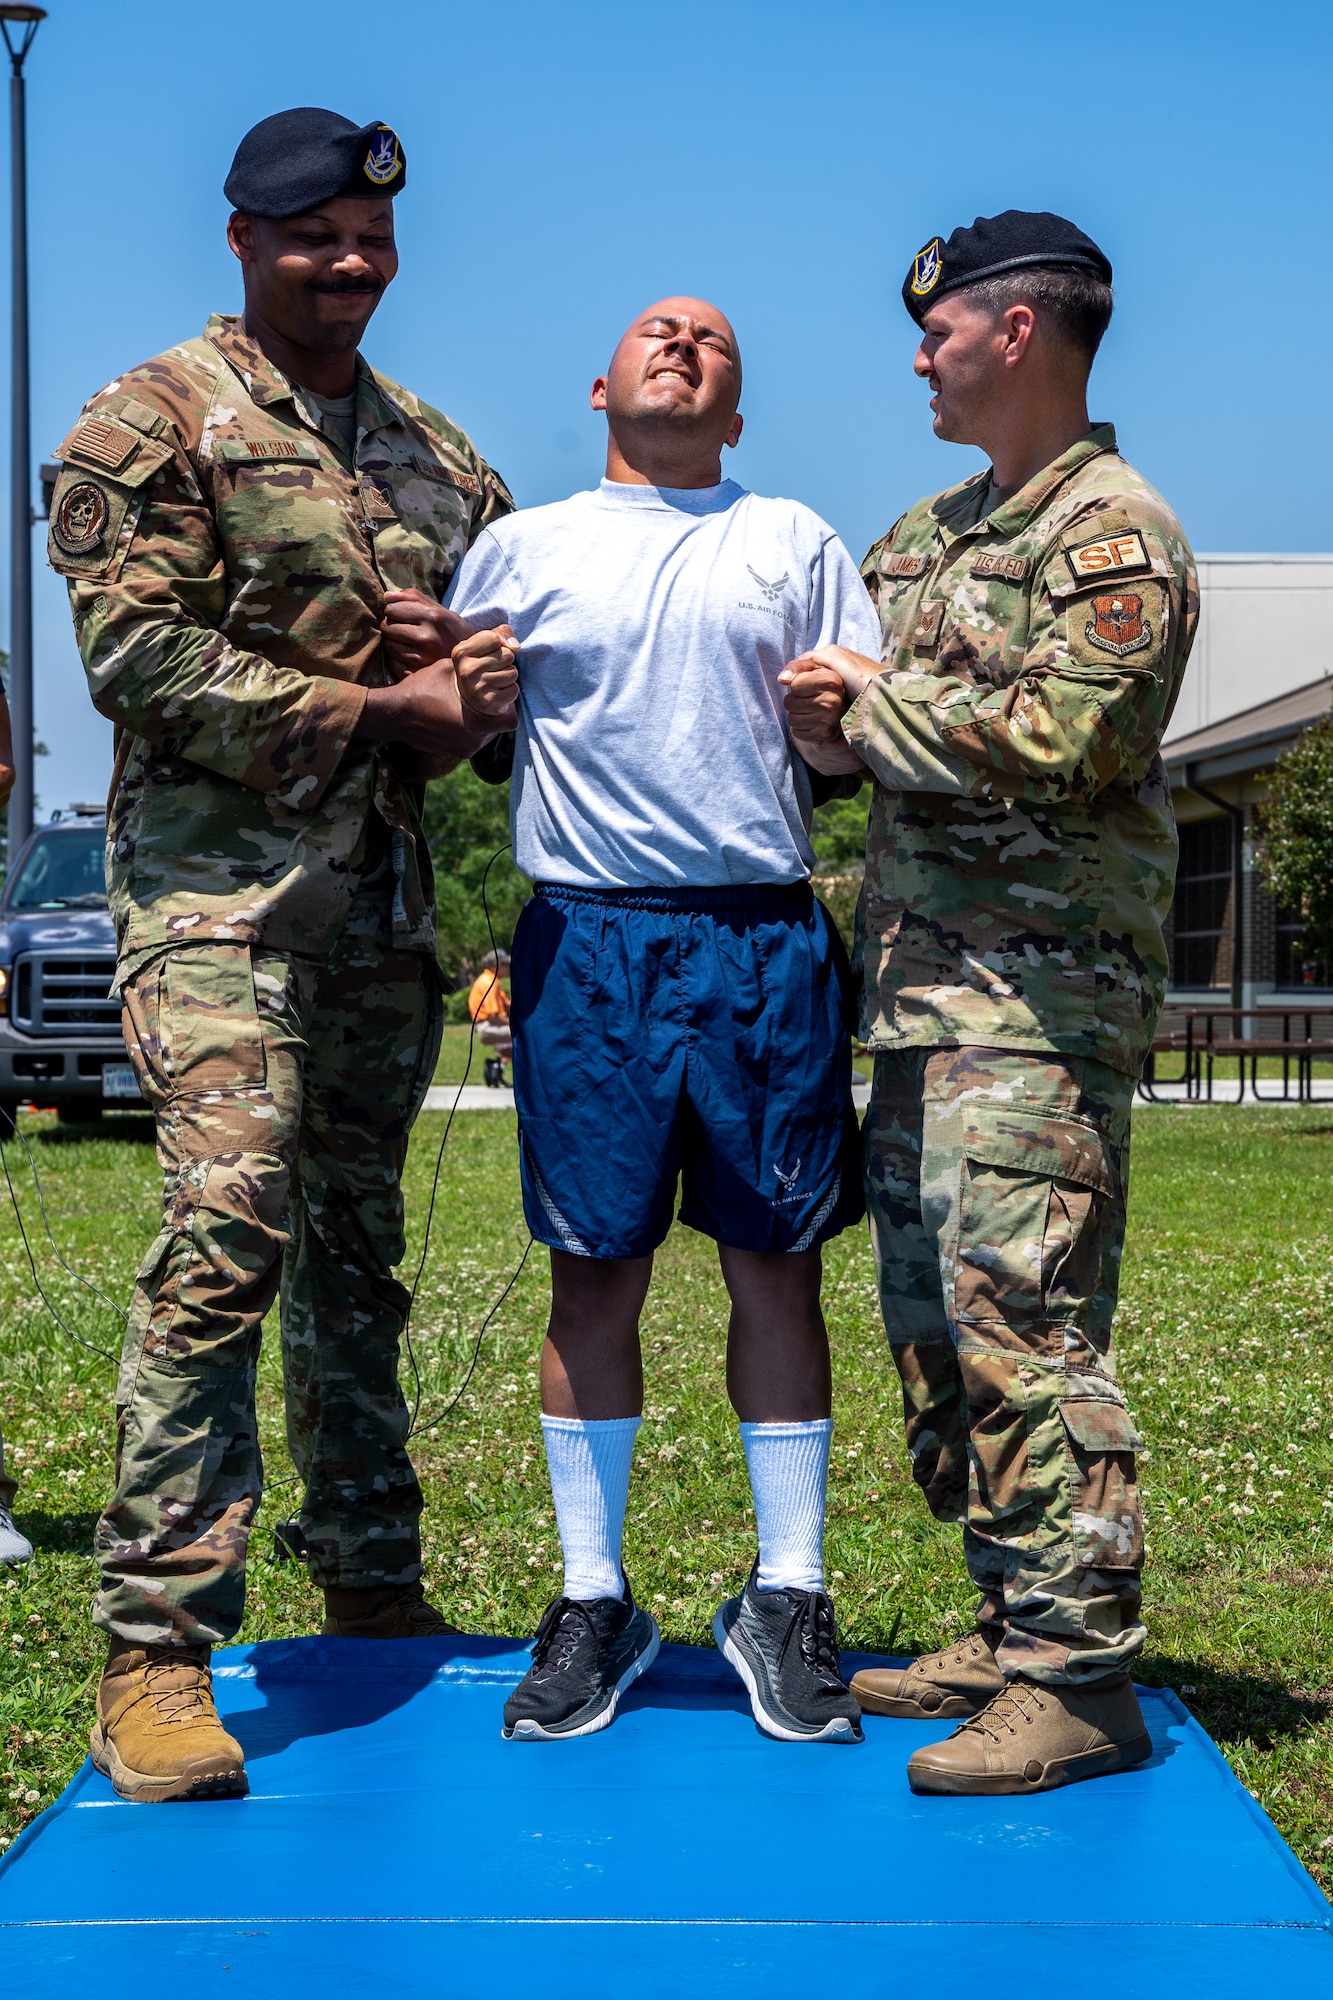 U.S. Air Force Airman 1st Class José Valce Gonzalez, 81st Security Forces Squadron defender, gets tased by Staff Sgt. Jeffrey Wilson, 81st SFS flight sergeant, and Staff Sgt. John James, 81st SFS defender, during a demonstration for National Police Week at Keesler Air Force Base, Mississippi, May 16, 2023.